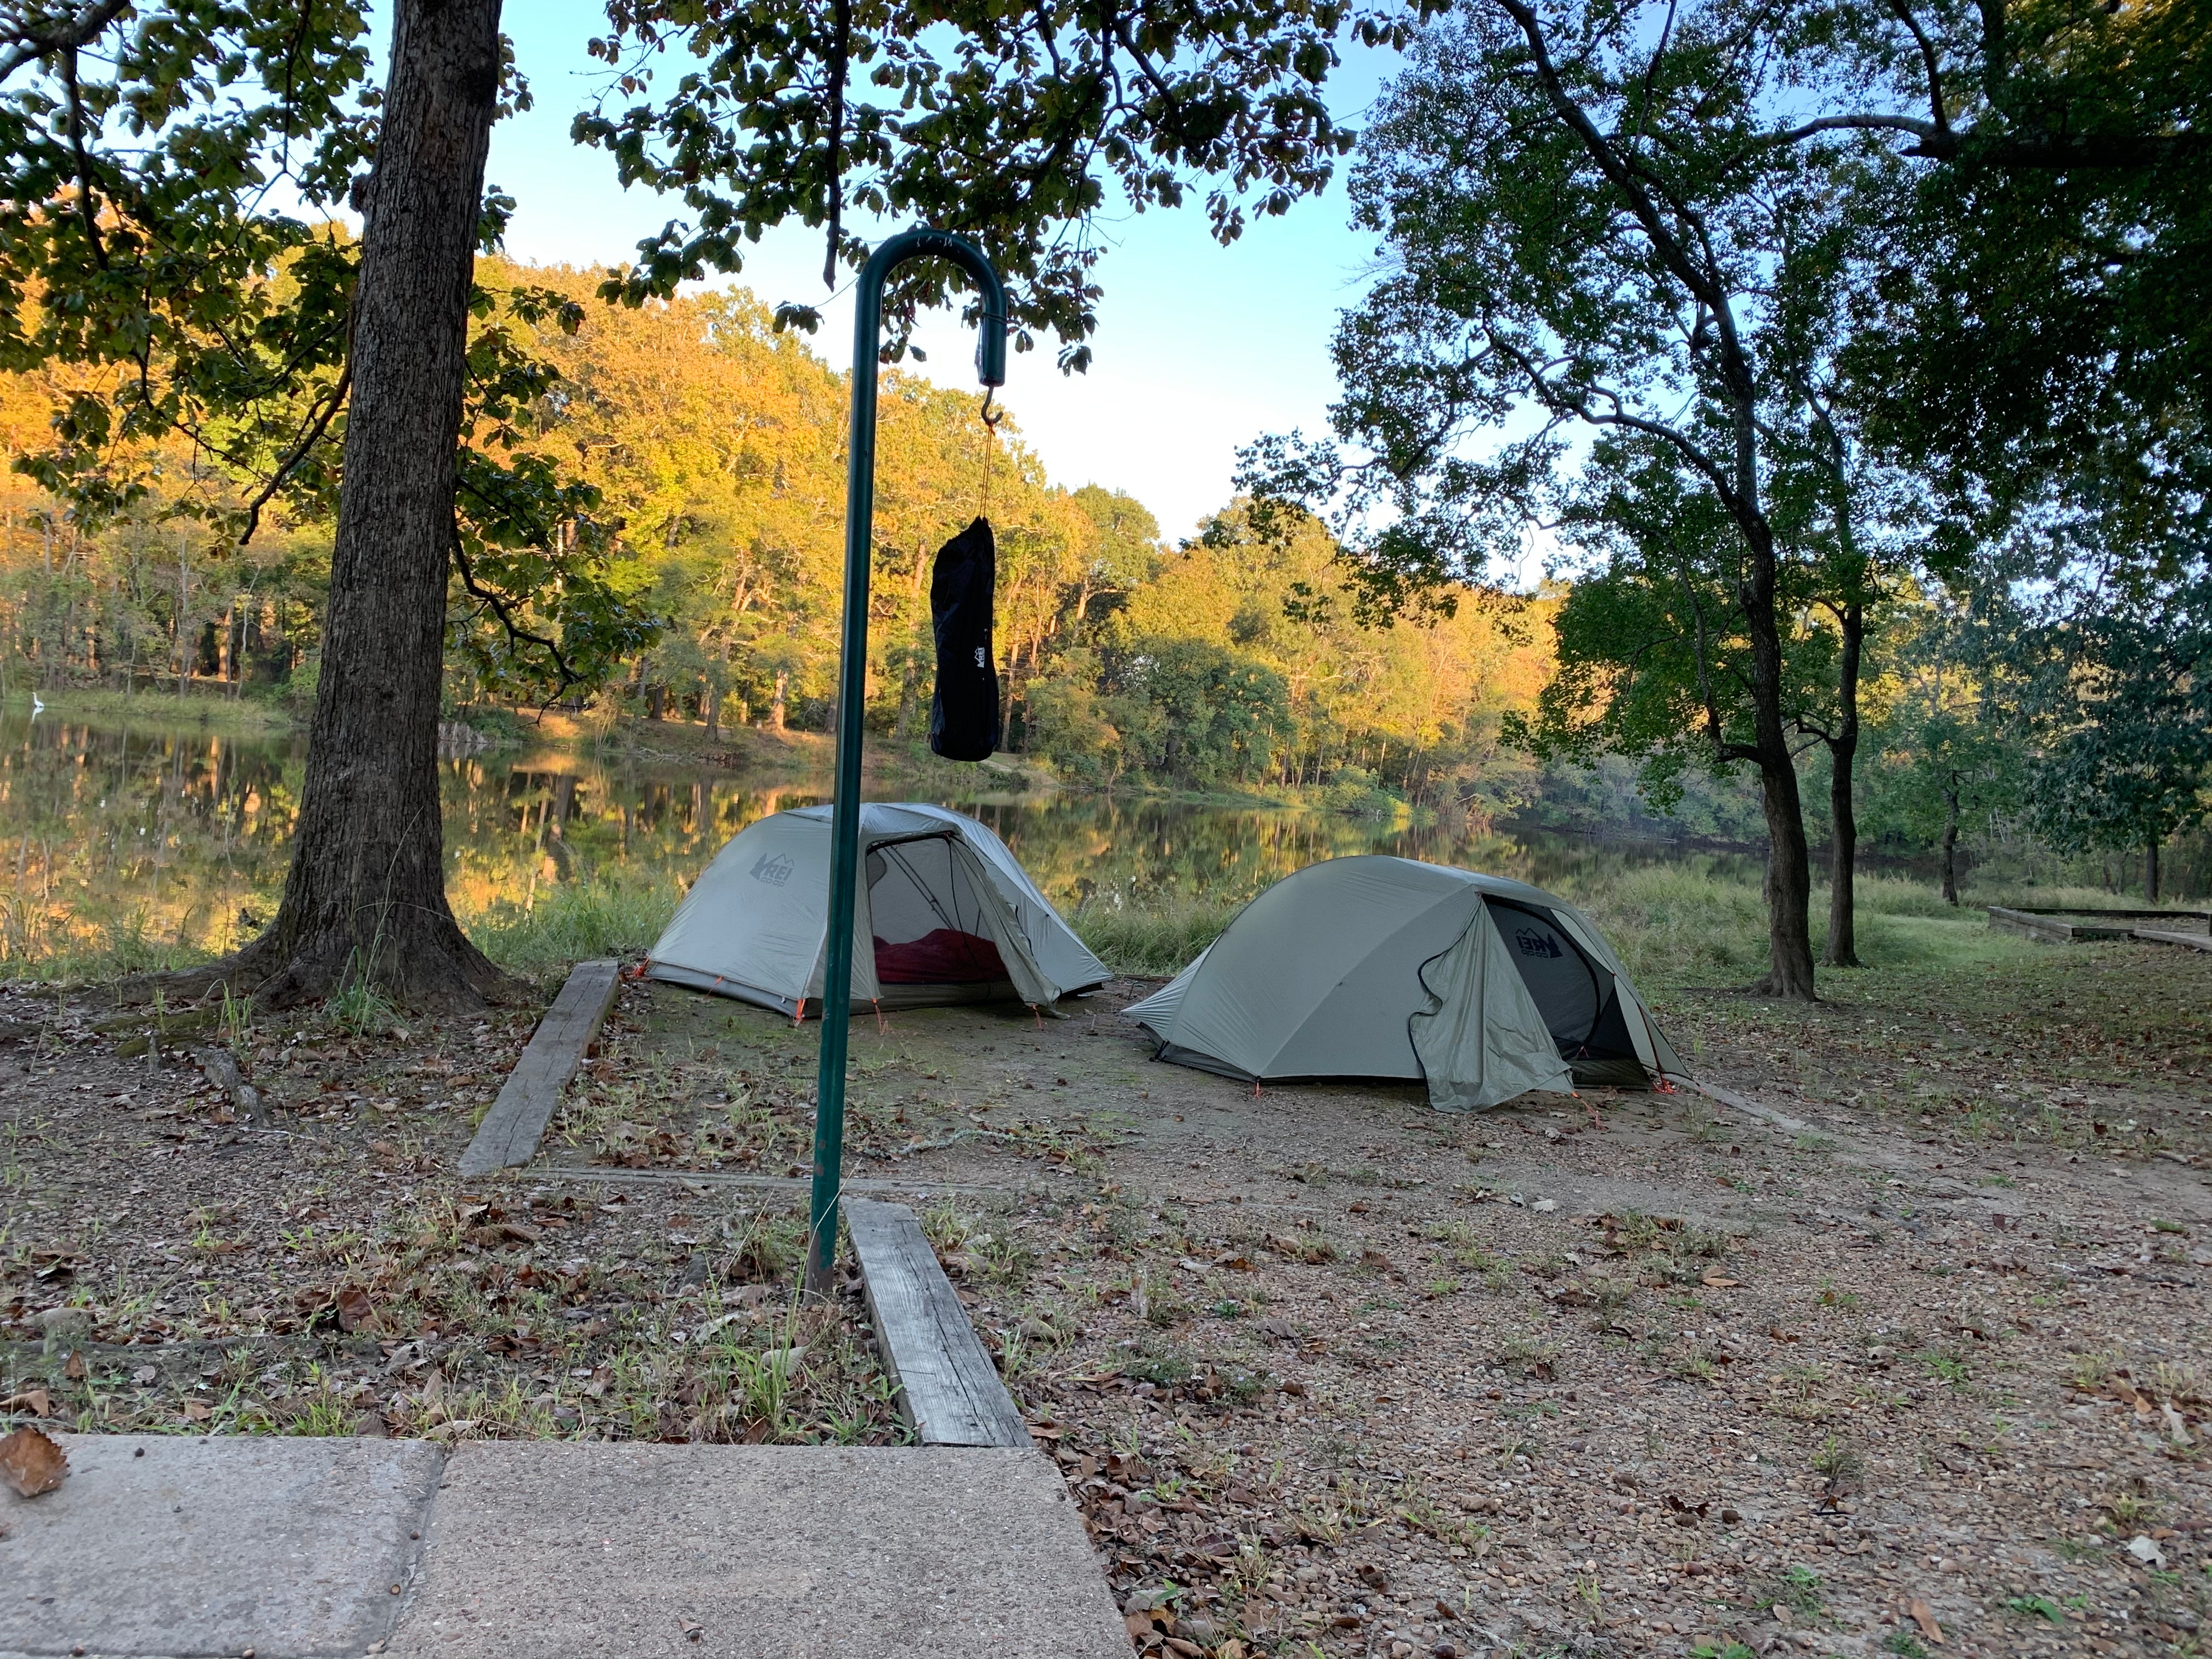 Camp site on the lake